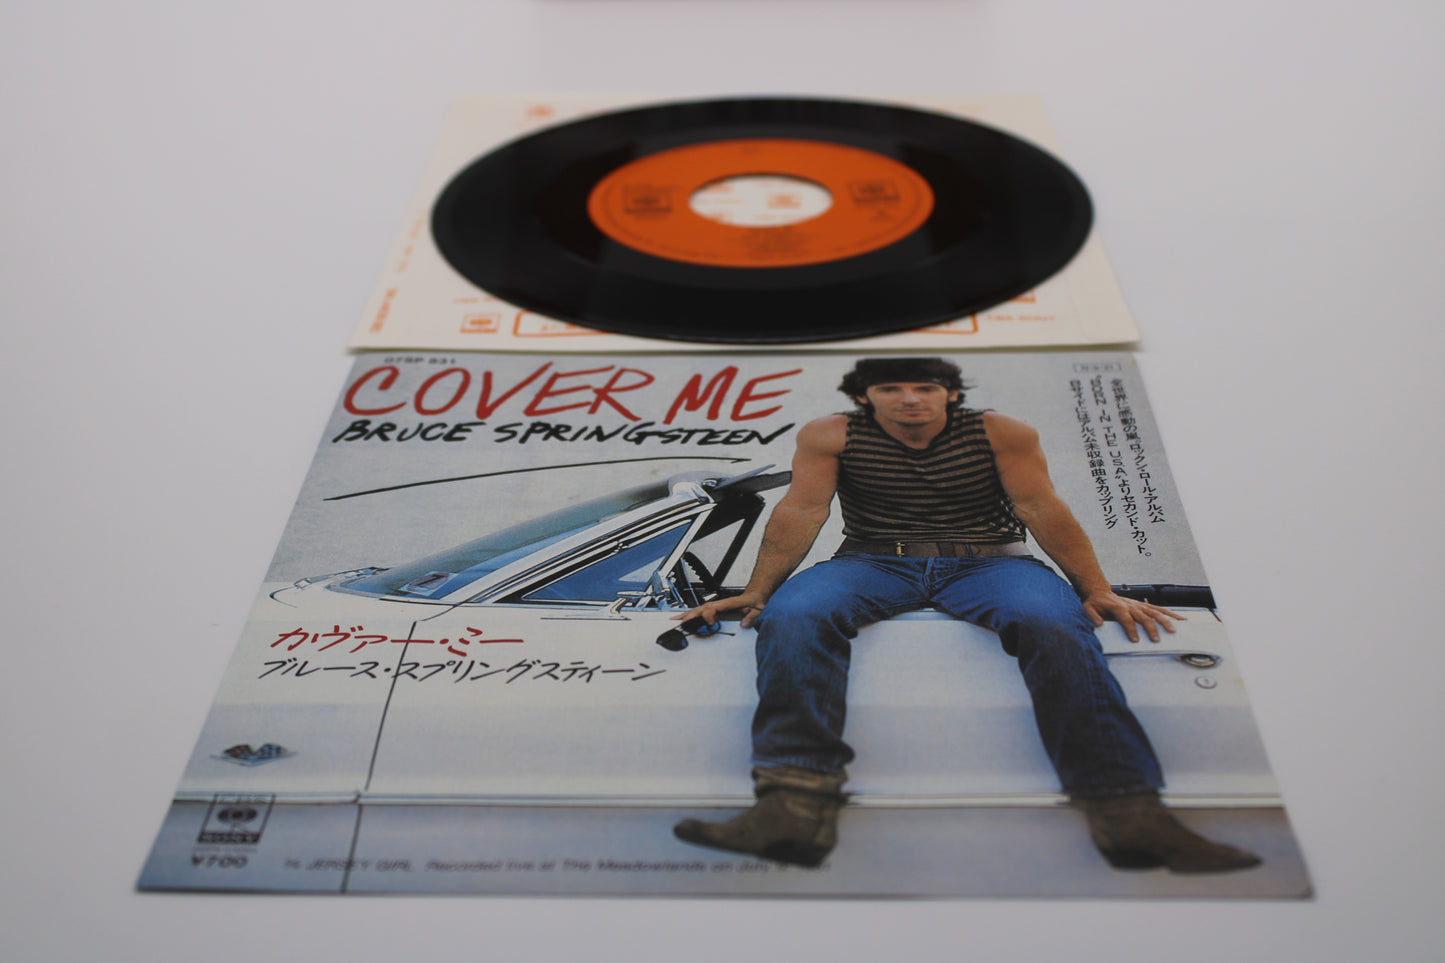 Bruce Springsteen - Cover Me & Jersey Girl - 45 Record Import Japan 1984 Near Mint